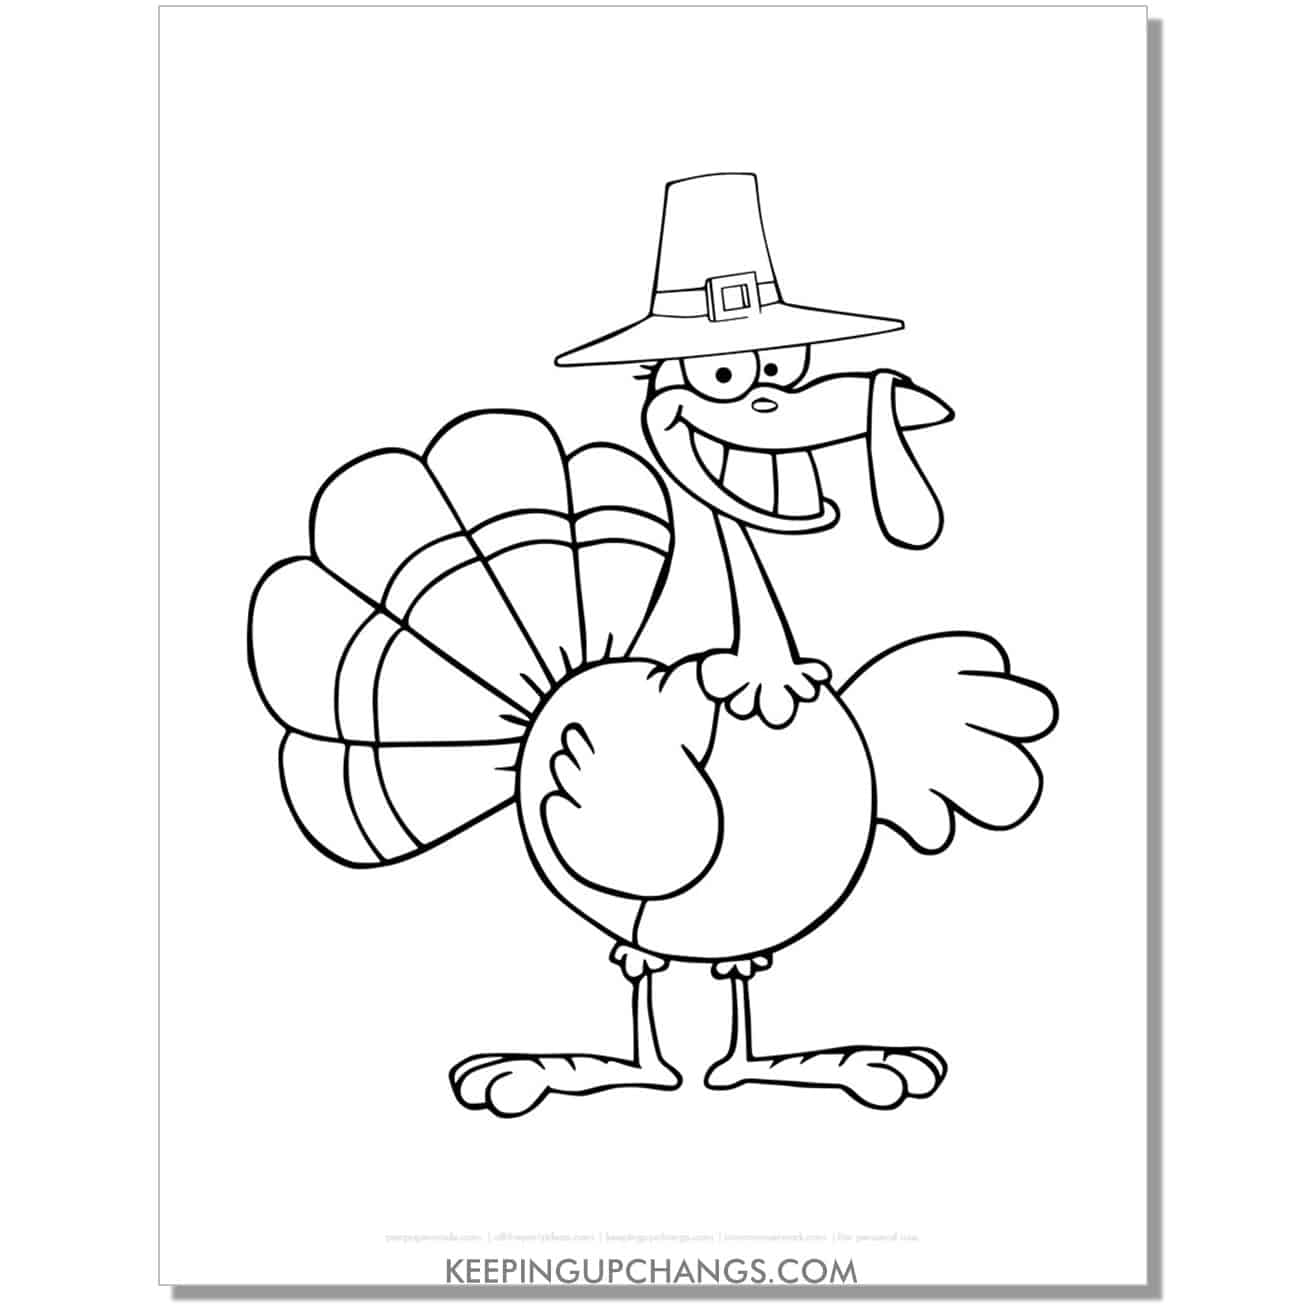 free smiling turkey coloring page for fall, thanksgiving.